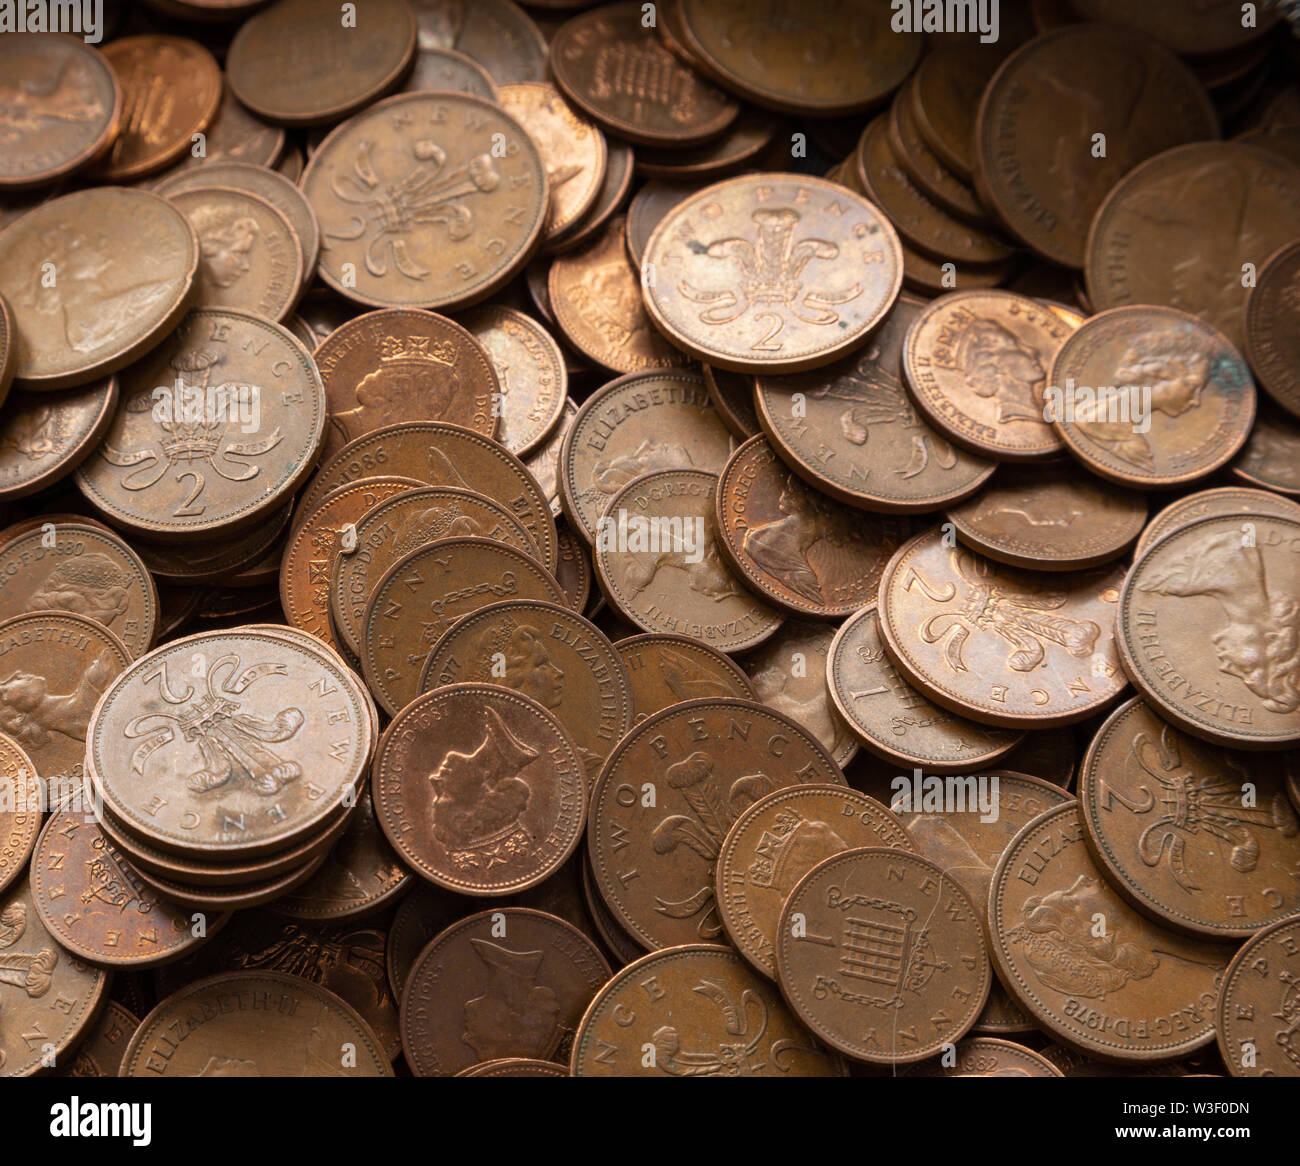 Pennies, UK. Mixture of 1p and 2p British coins copper. loose change Stock Photo